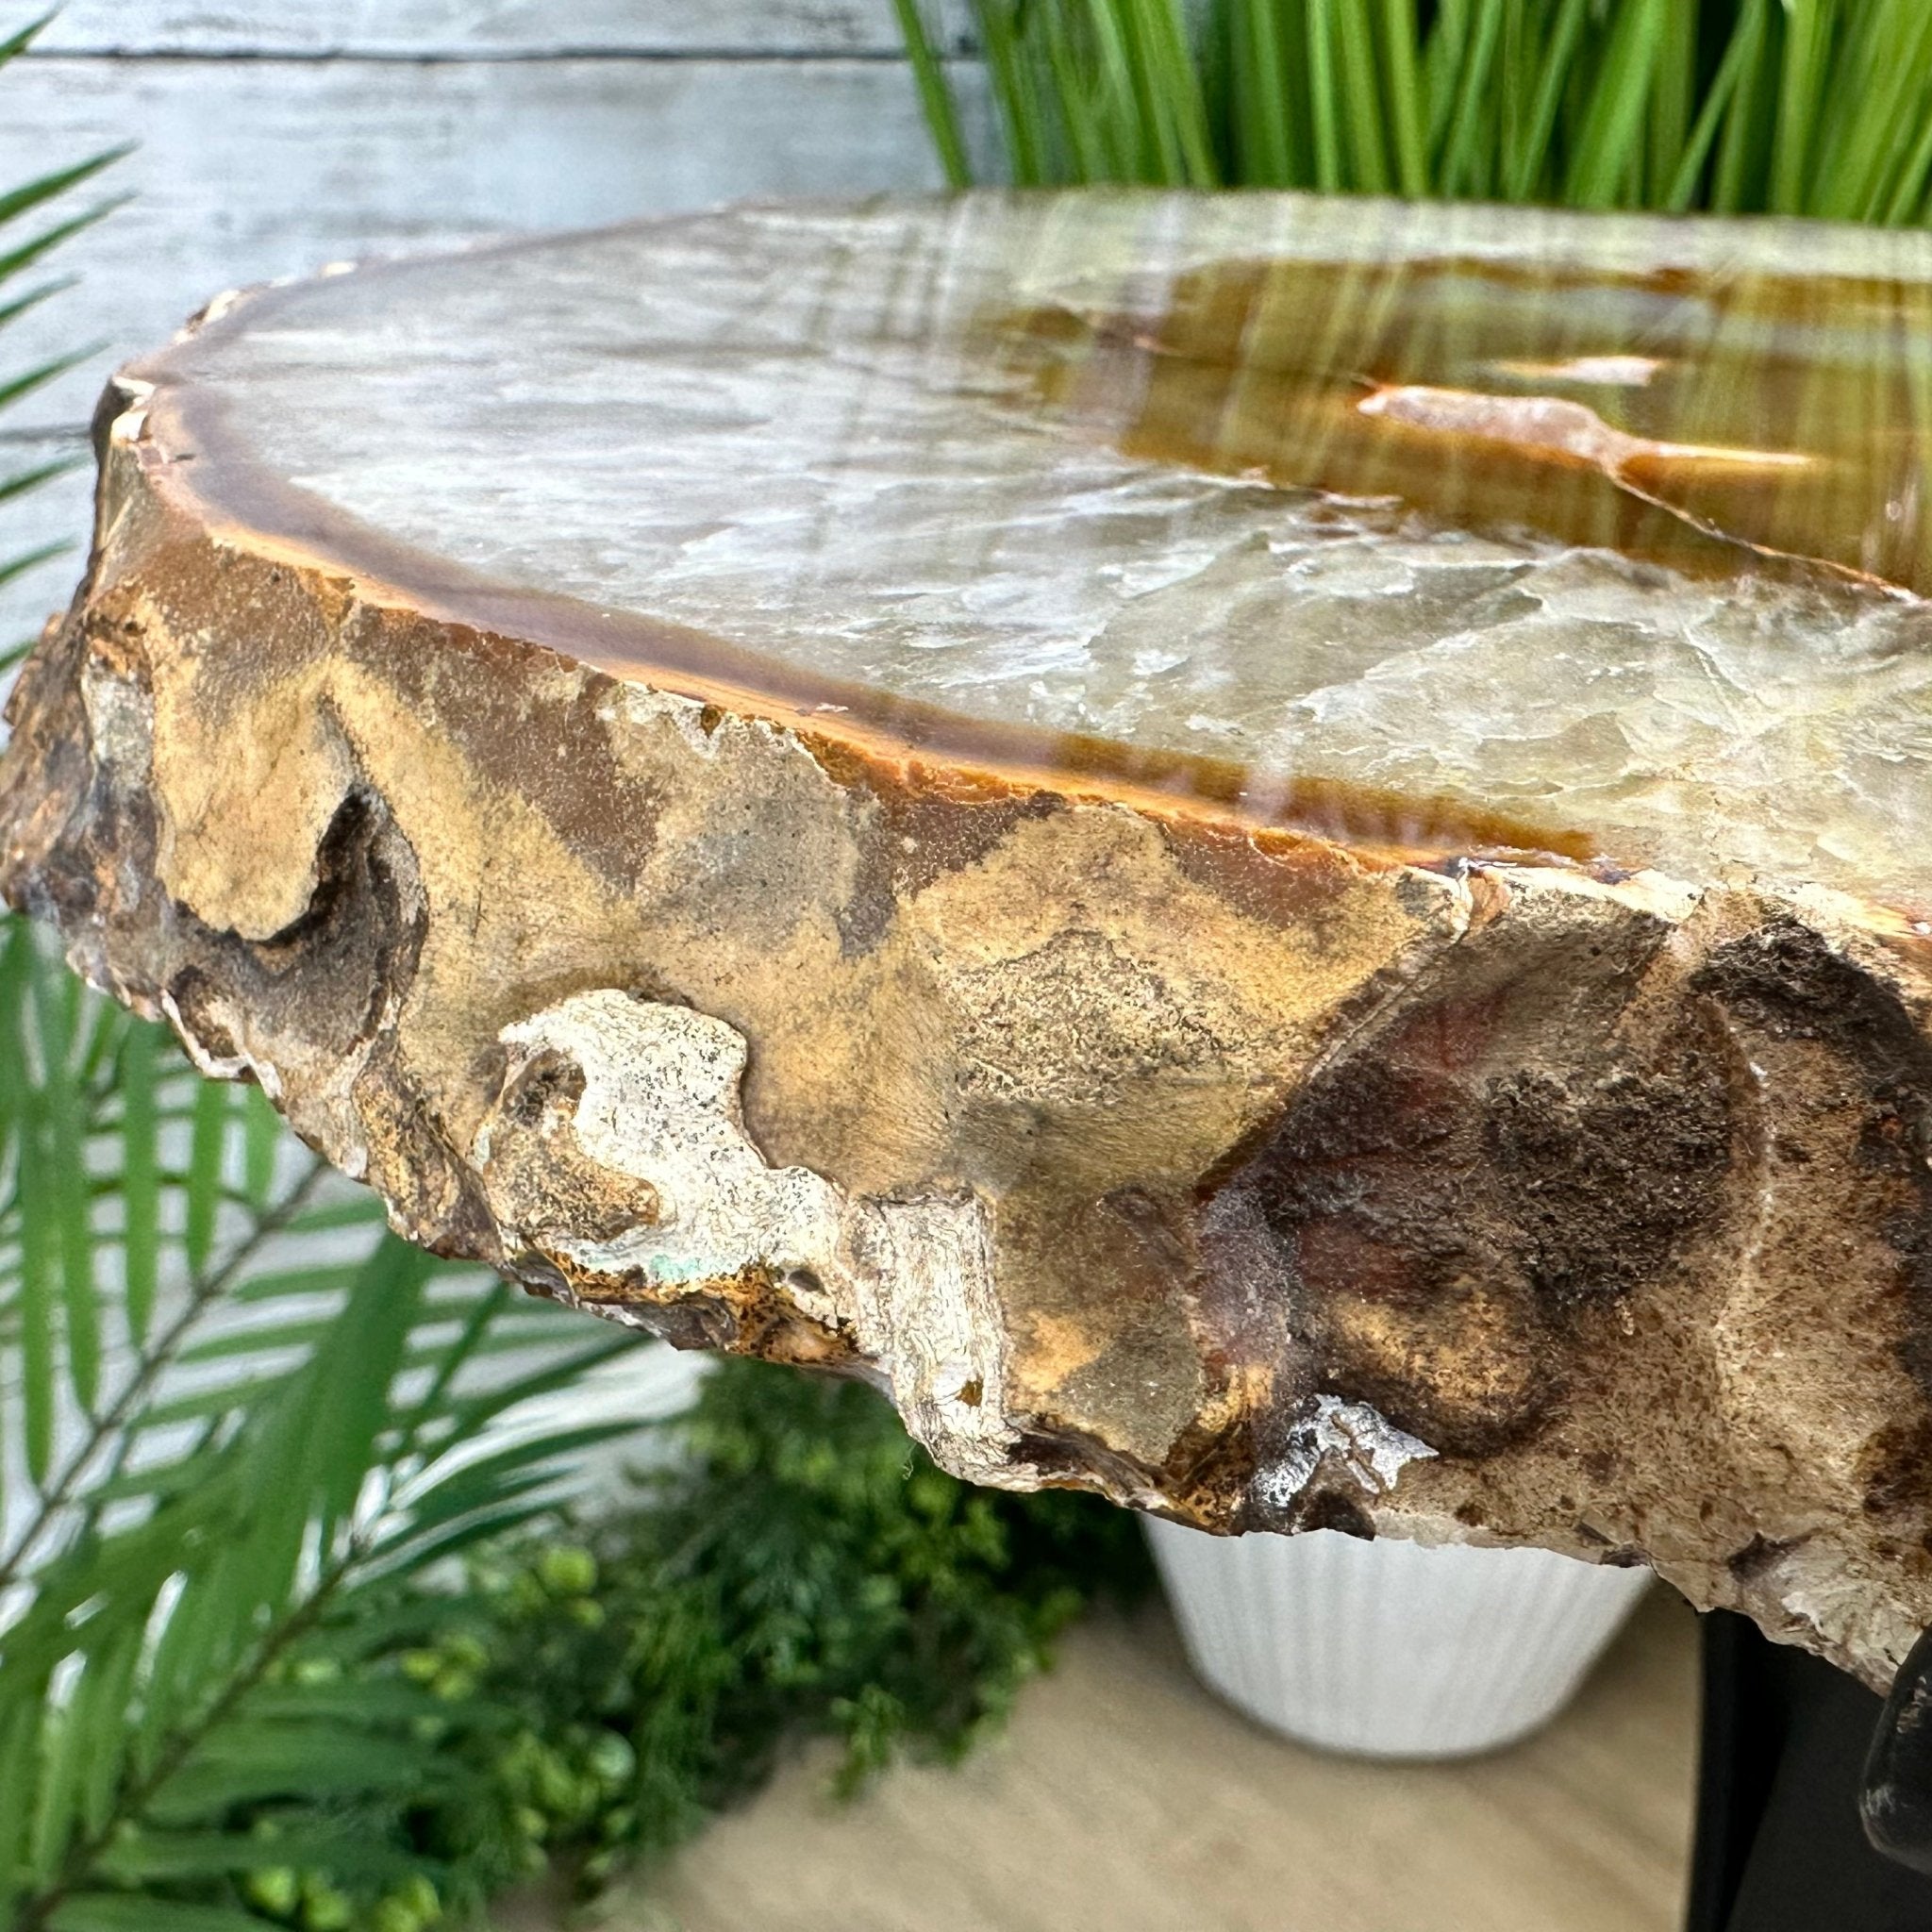 Natural Brazilian Agate Side Table on a black metal base, 22.25" tall #1306-0043 by Brazil Gems - Brazil GemsBrazil GemsNatural Brazilian Agate Side Table on a black metal base, 22.25" tall #1306-0043 by Brazil GemsTables: Side1306-0043